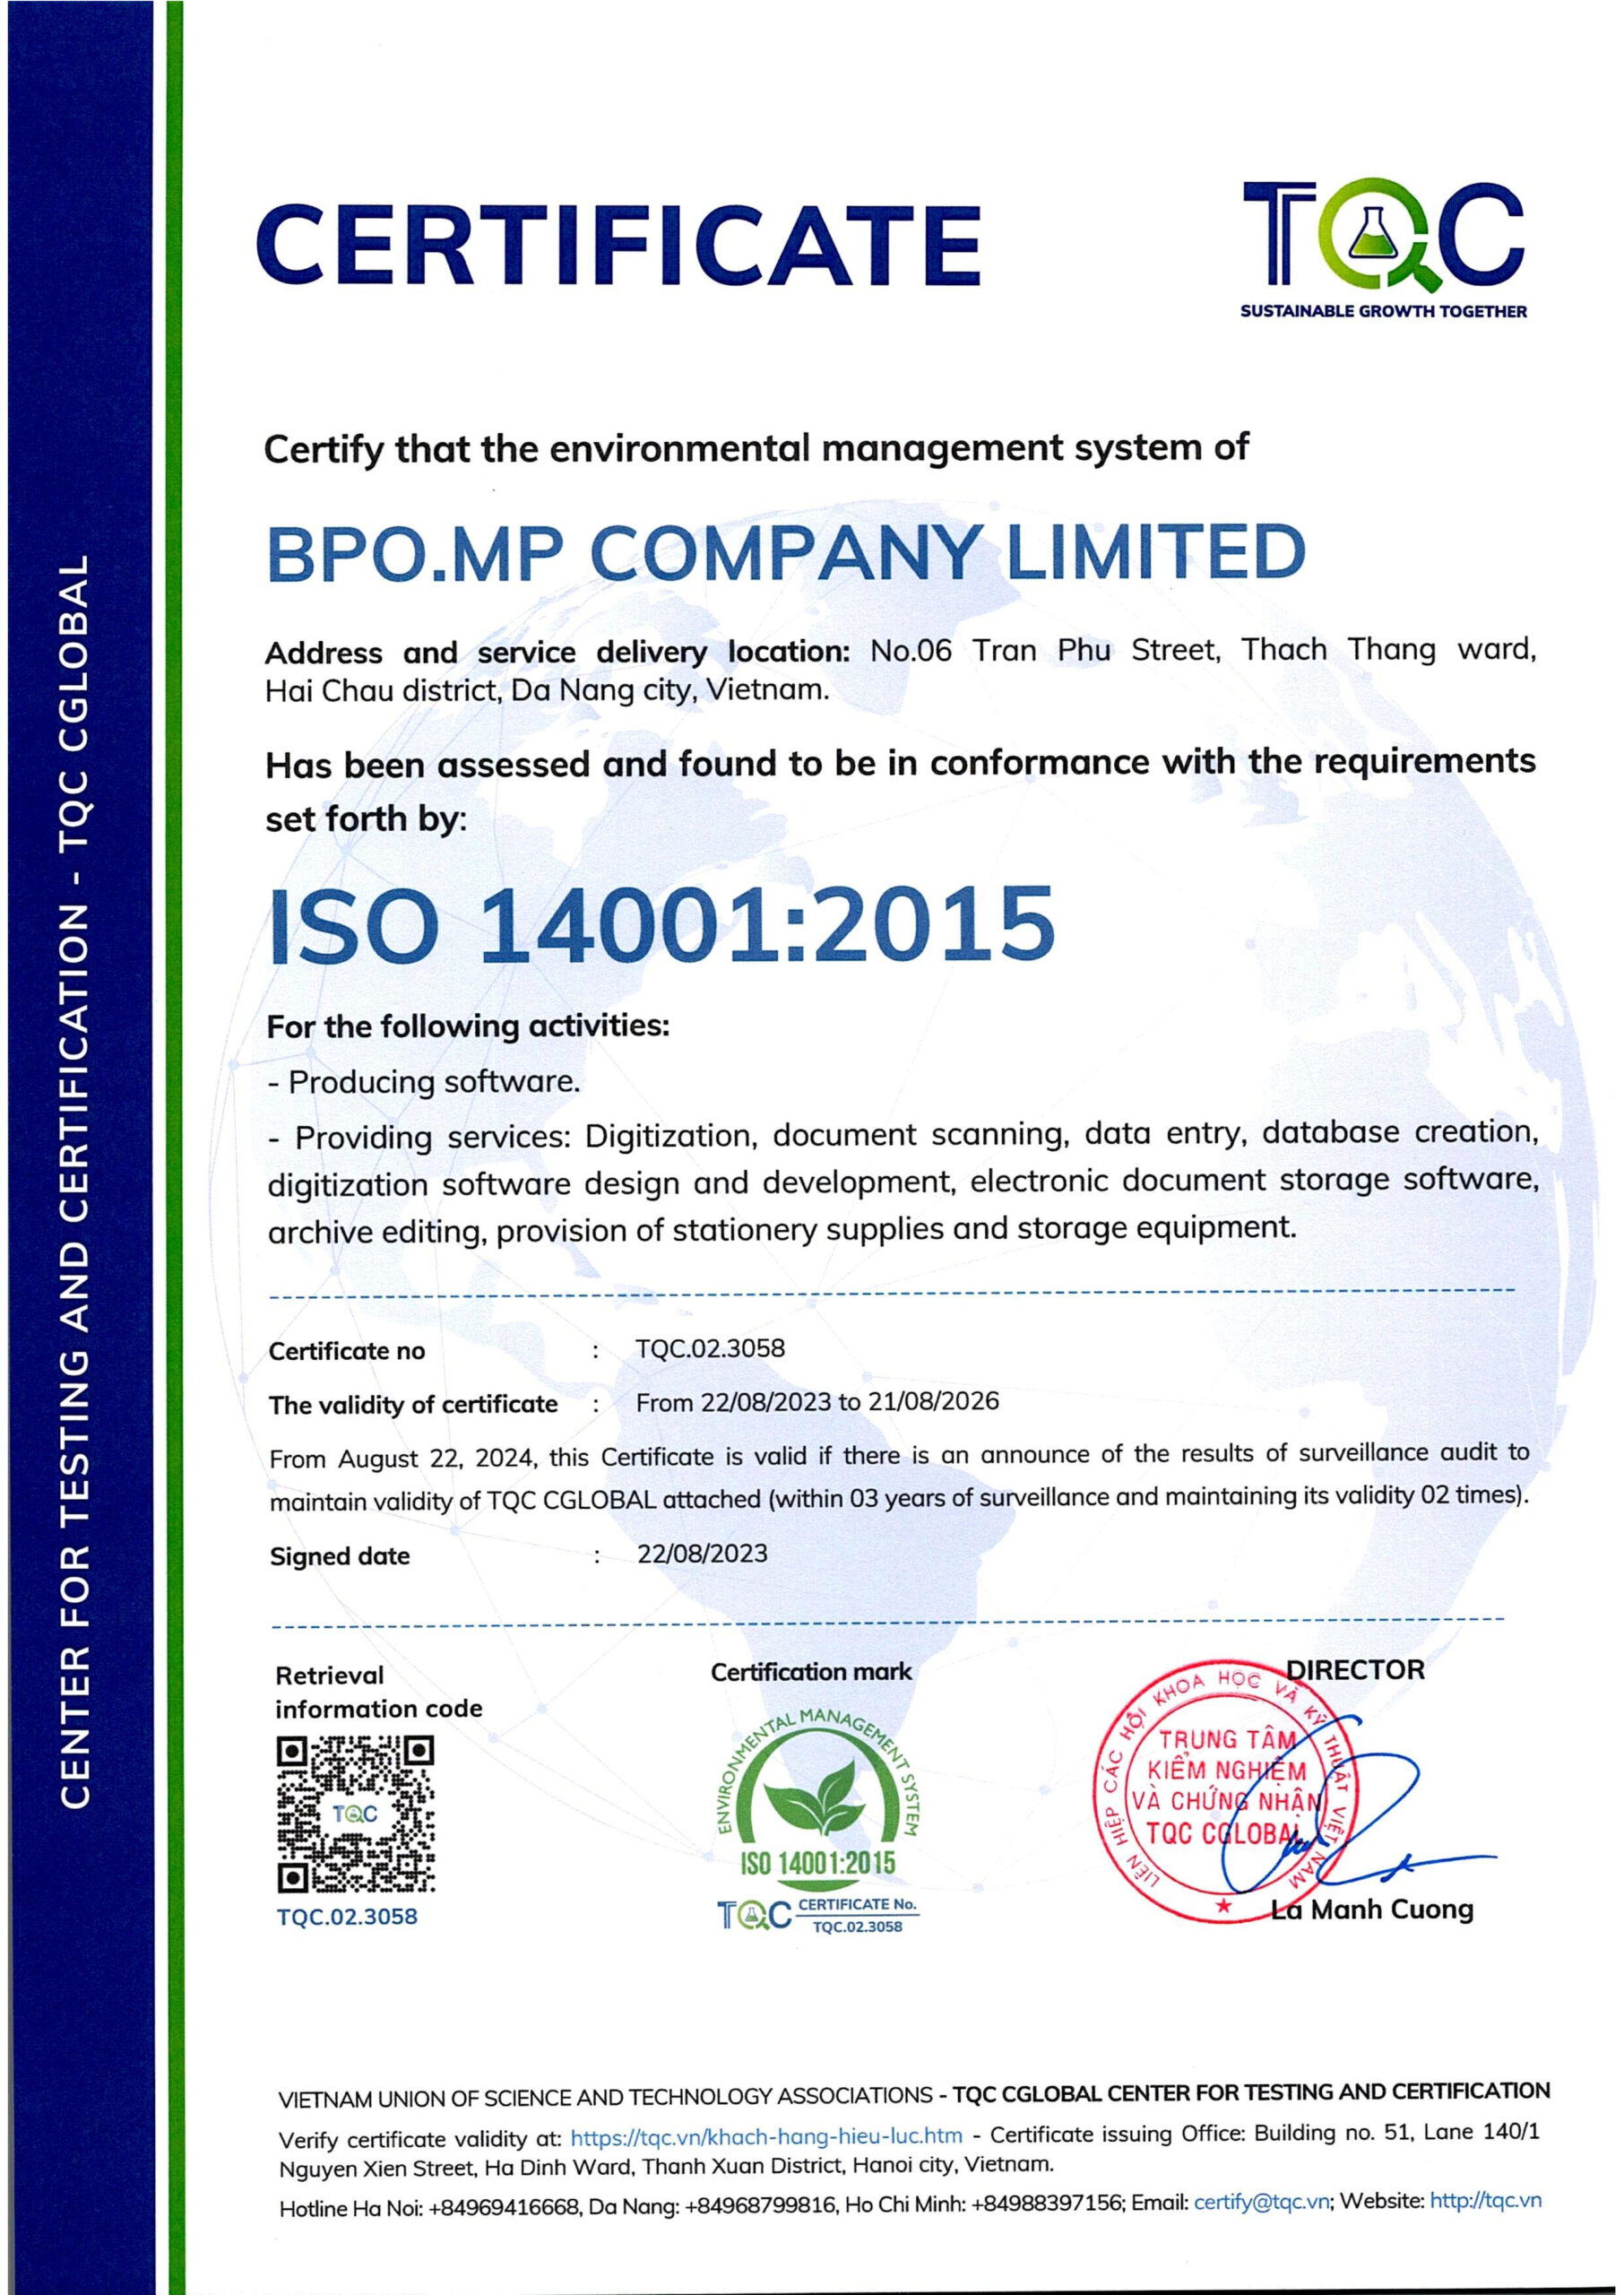 BPO.MP ACHIEVES ISO 14001:2015 CERTIFICATION – A COMMITMENT TO ENVIRONMENTAL EXCELLENCE